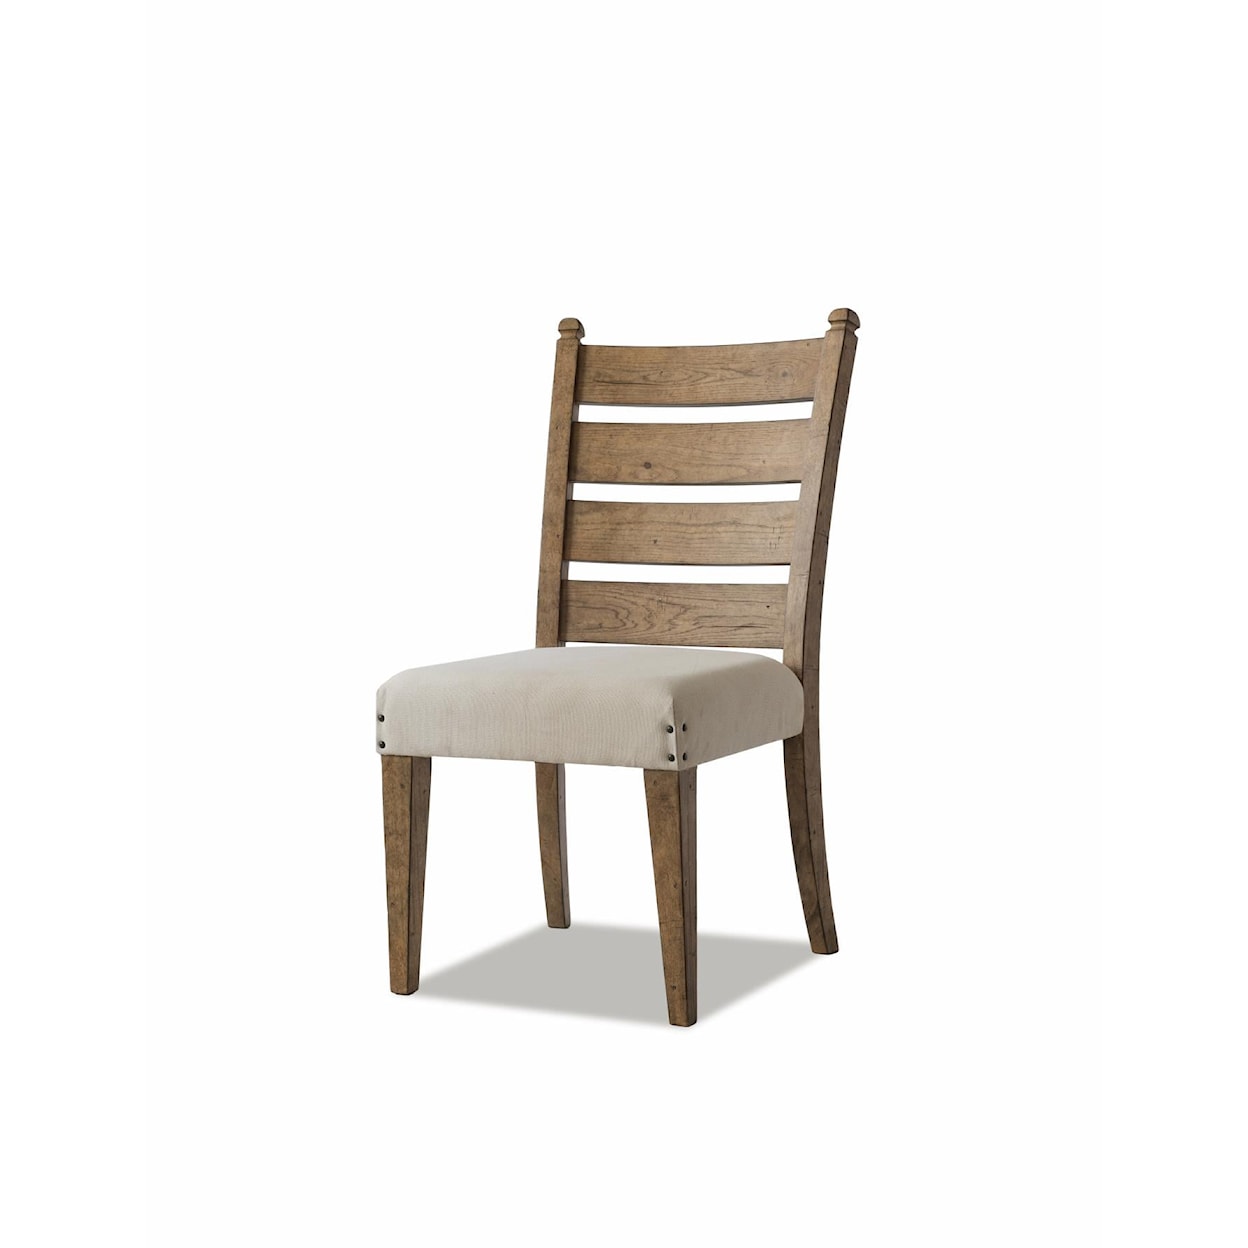 Trisha Yearwood Home Collection by Legacy Classic Coming Home Side Chair